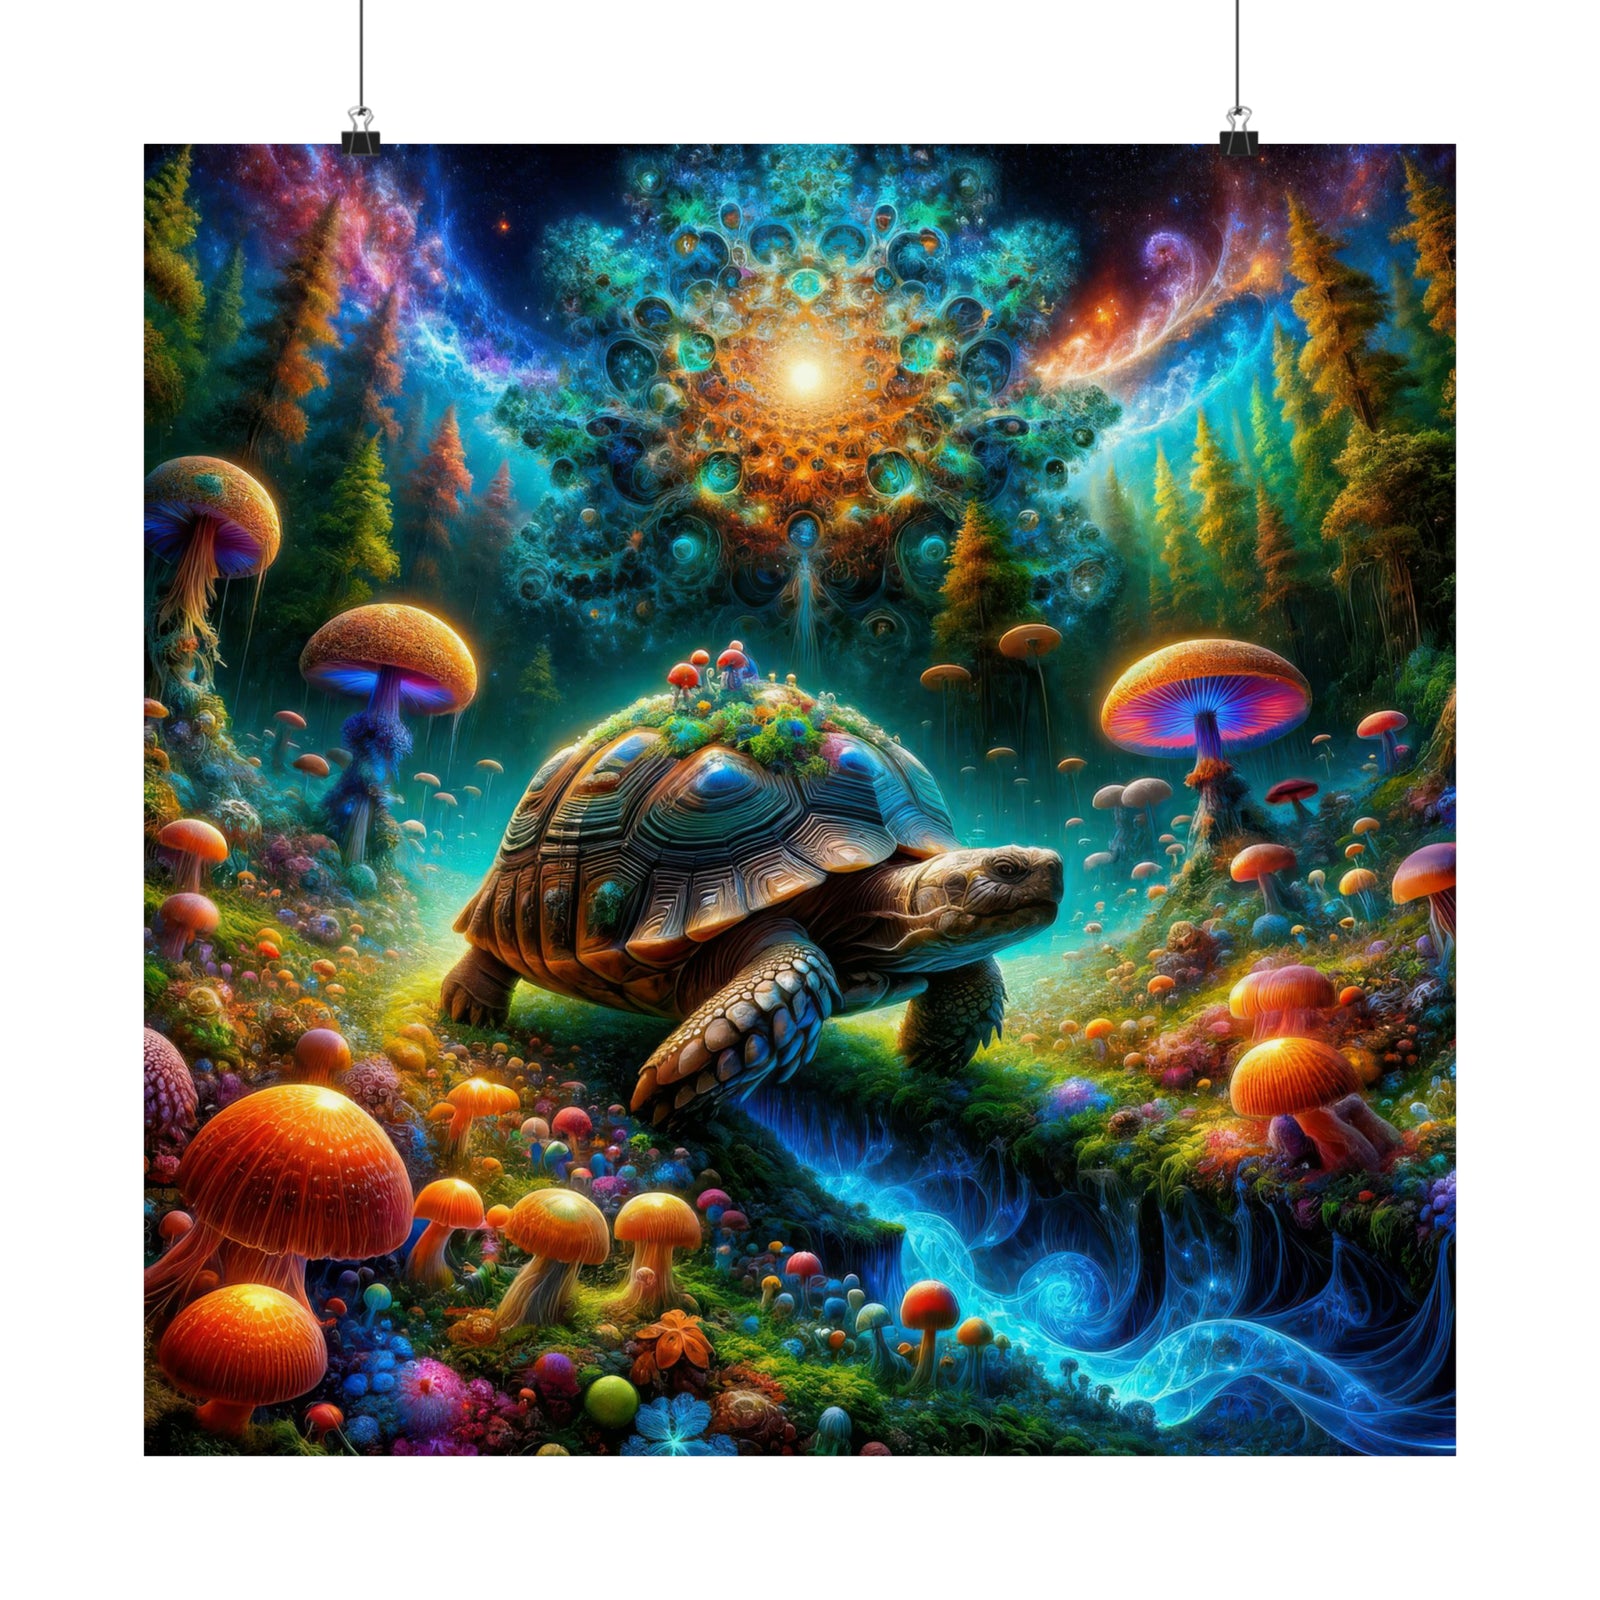 The Turtle's Dream Poster